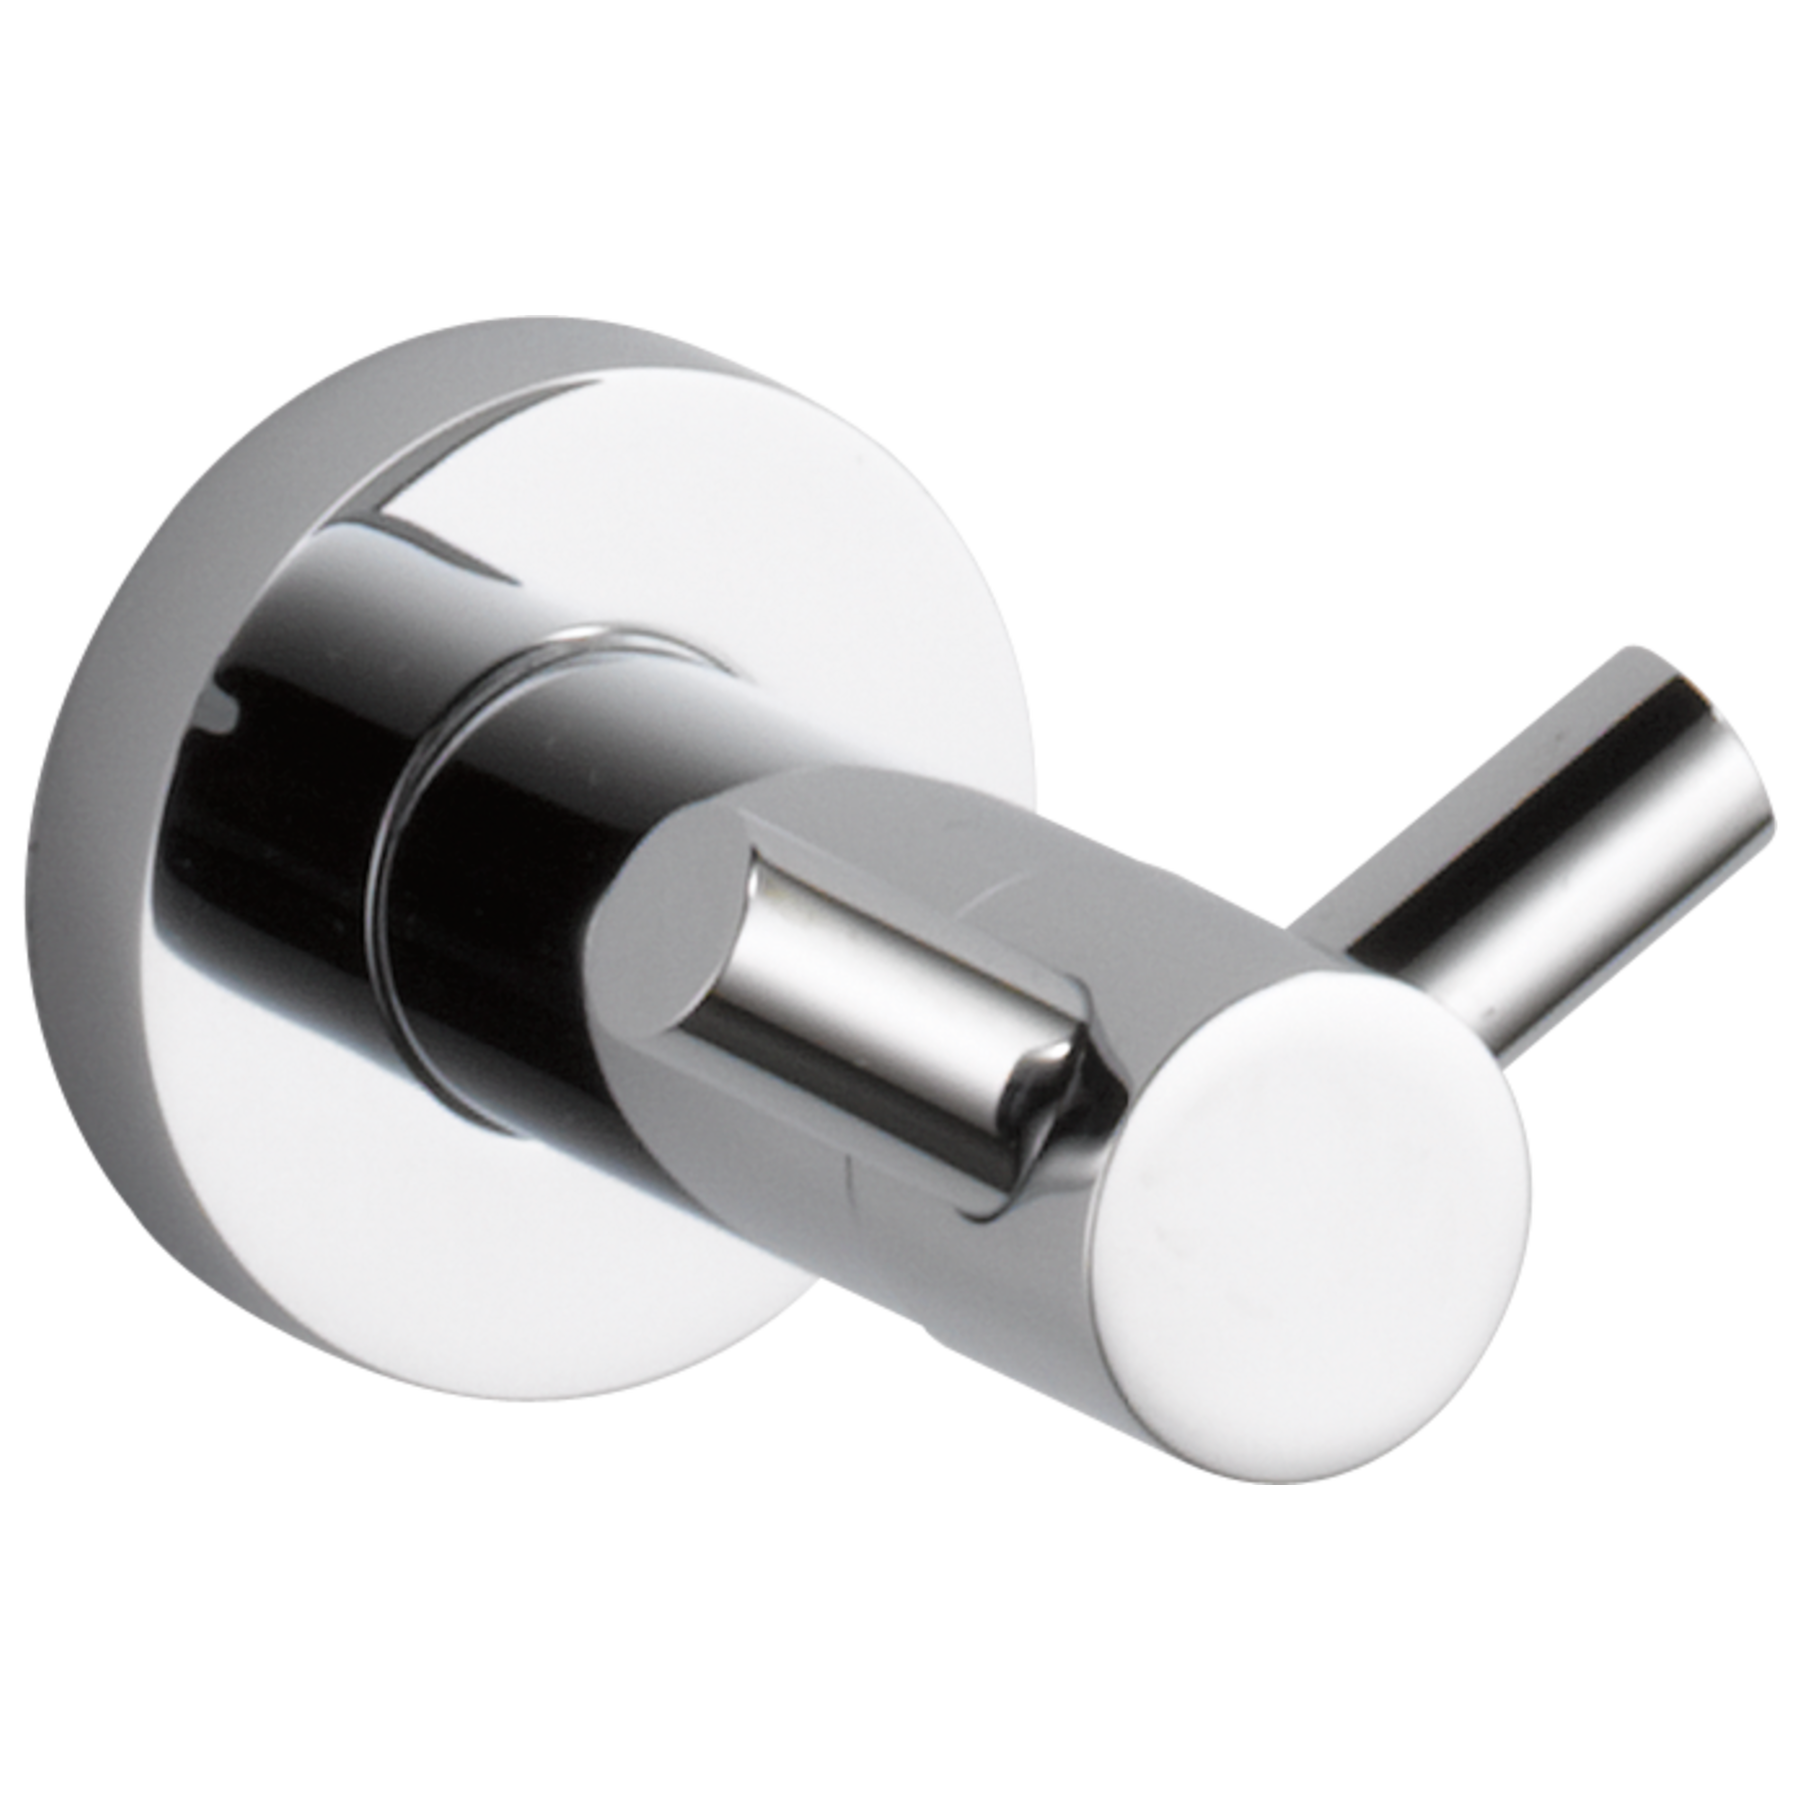 Hudson Reed Traditional Chrome Double Robe Hook - LH311  Plumbing  accessories, Robe hook, Bathroom storage units